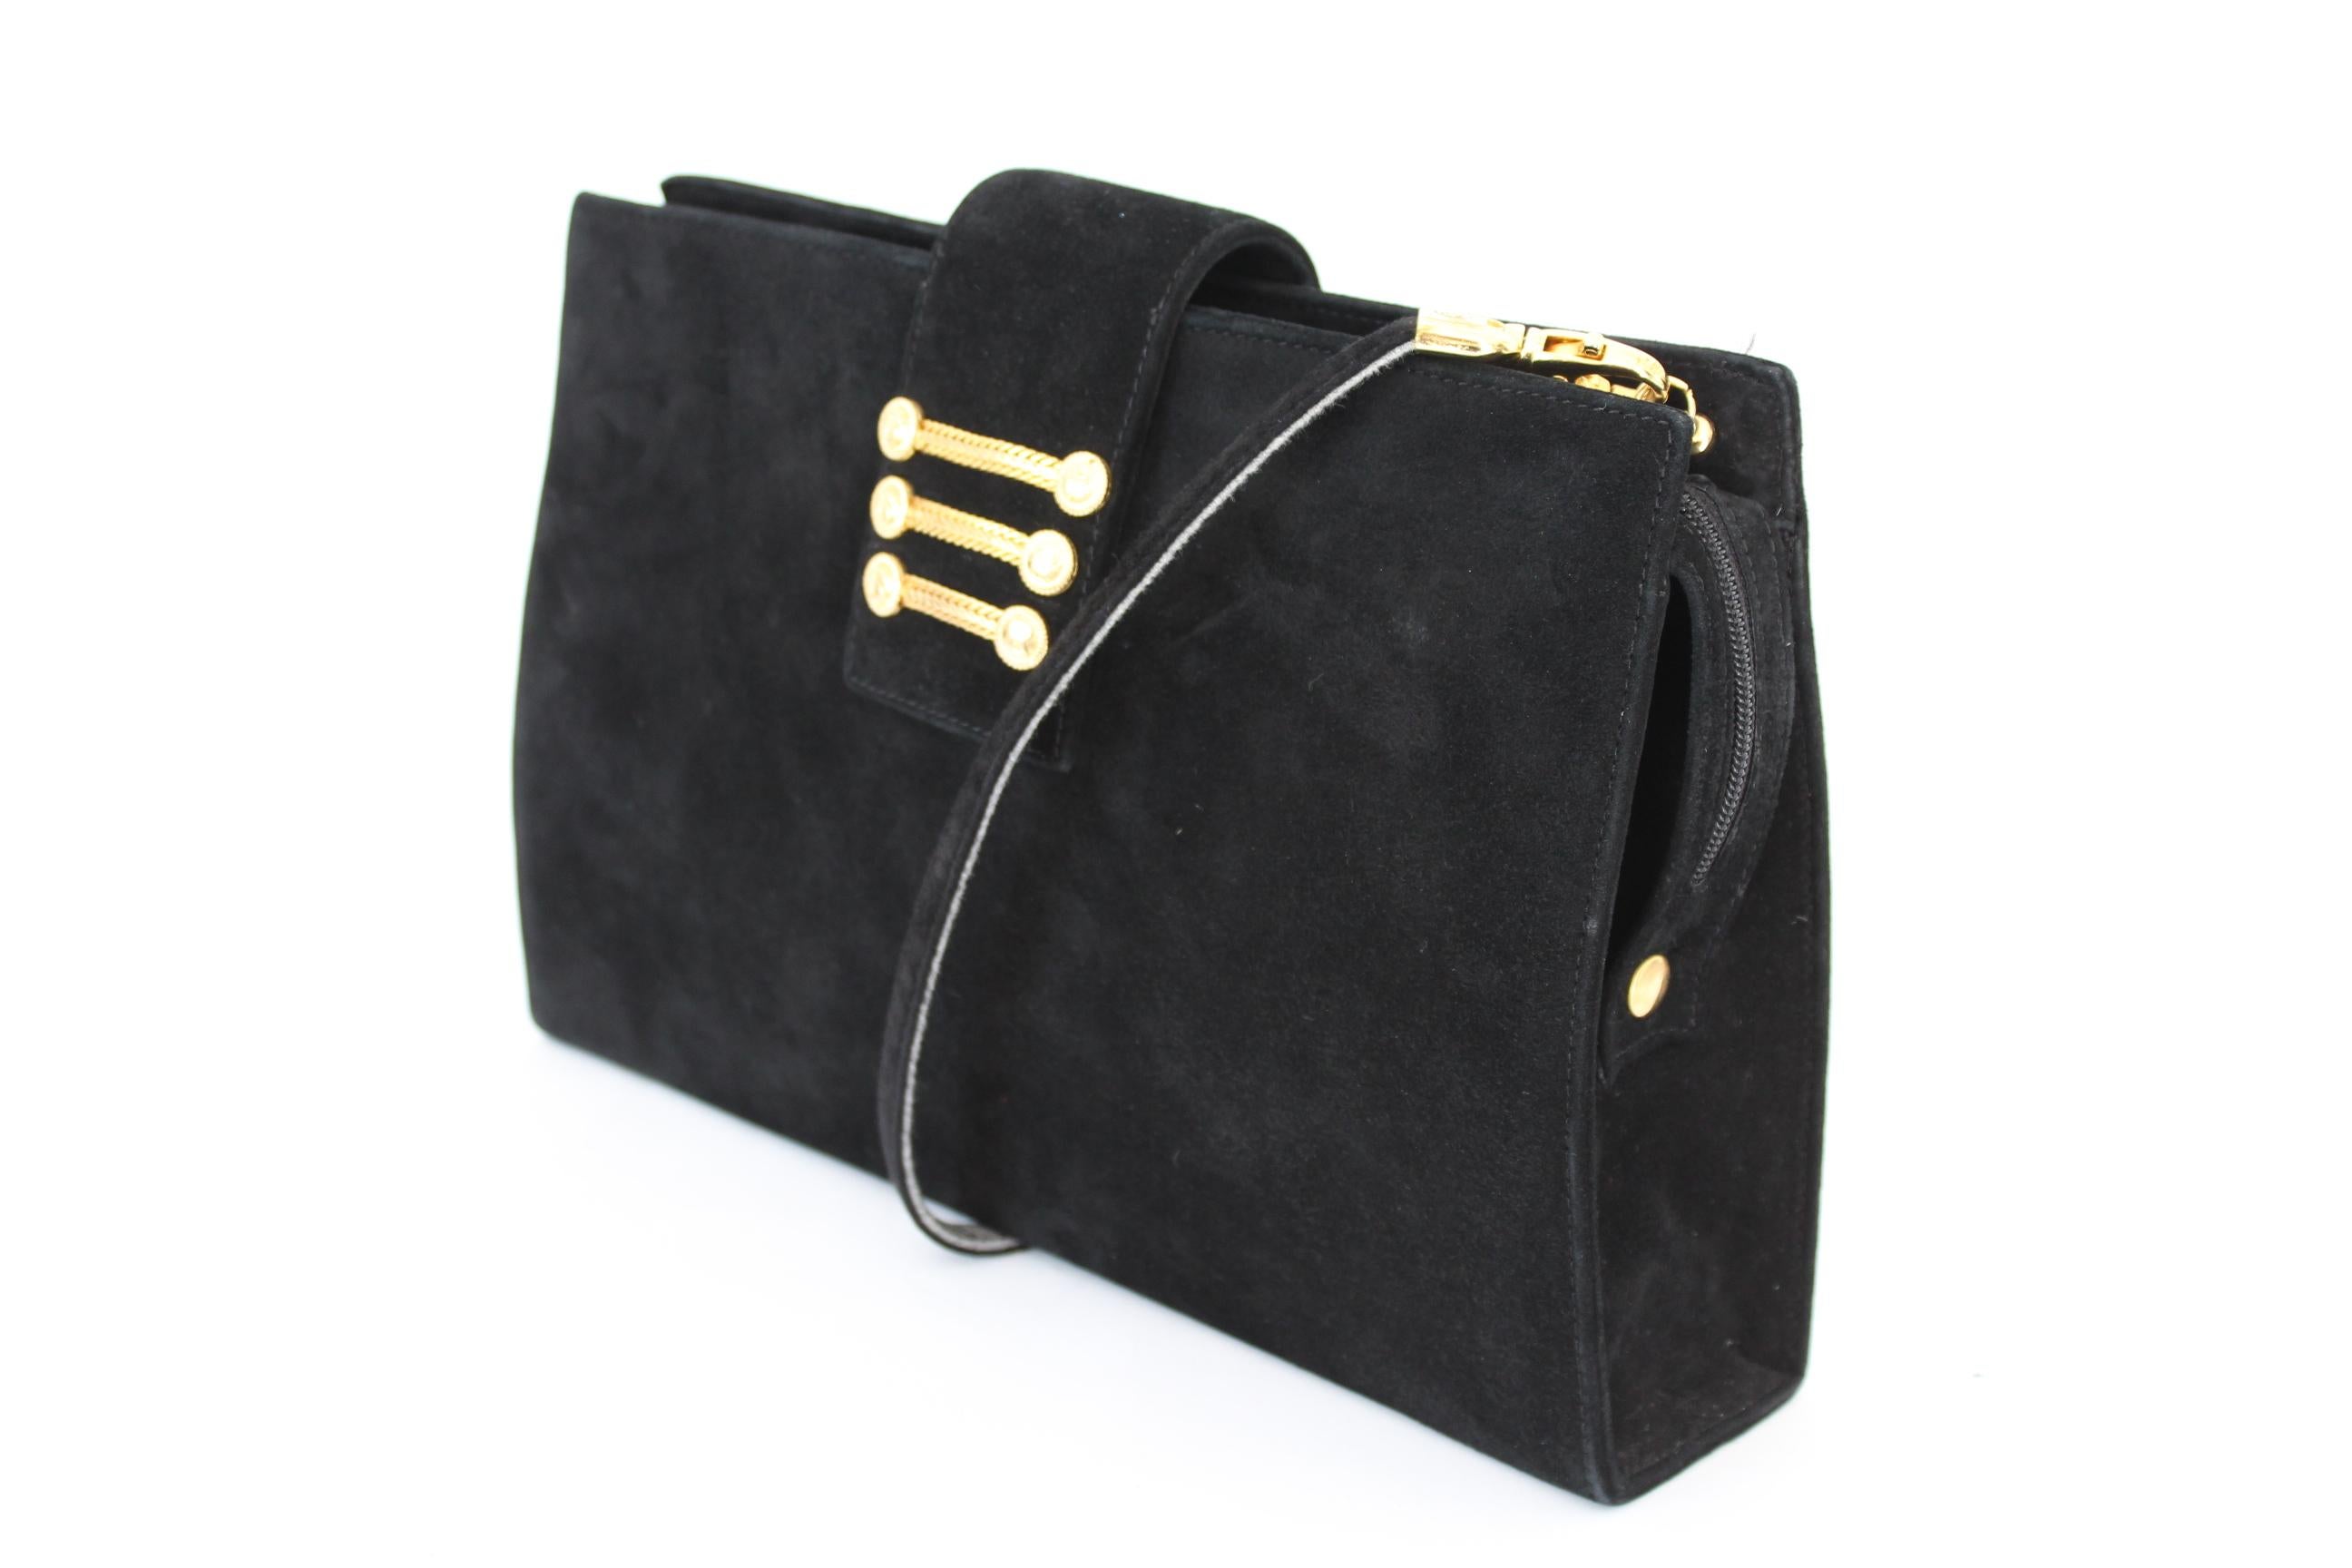 Sergio Rossi 80s vintage elegant bag. Square model rigid with shoulder strap, fabric in velvet, color black with details in color gold. Zip and button closure. Made in Italy. Excellent vintage conditions, the shoulder strap on the inside shows some